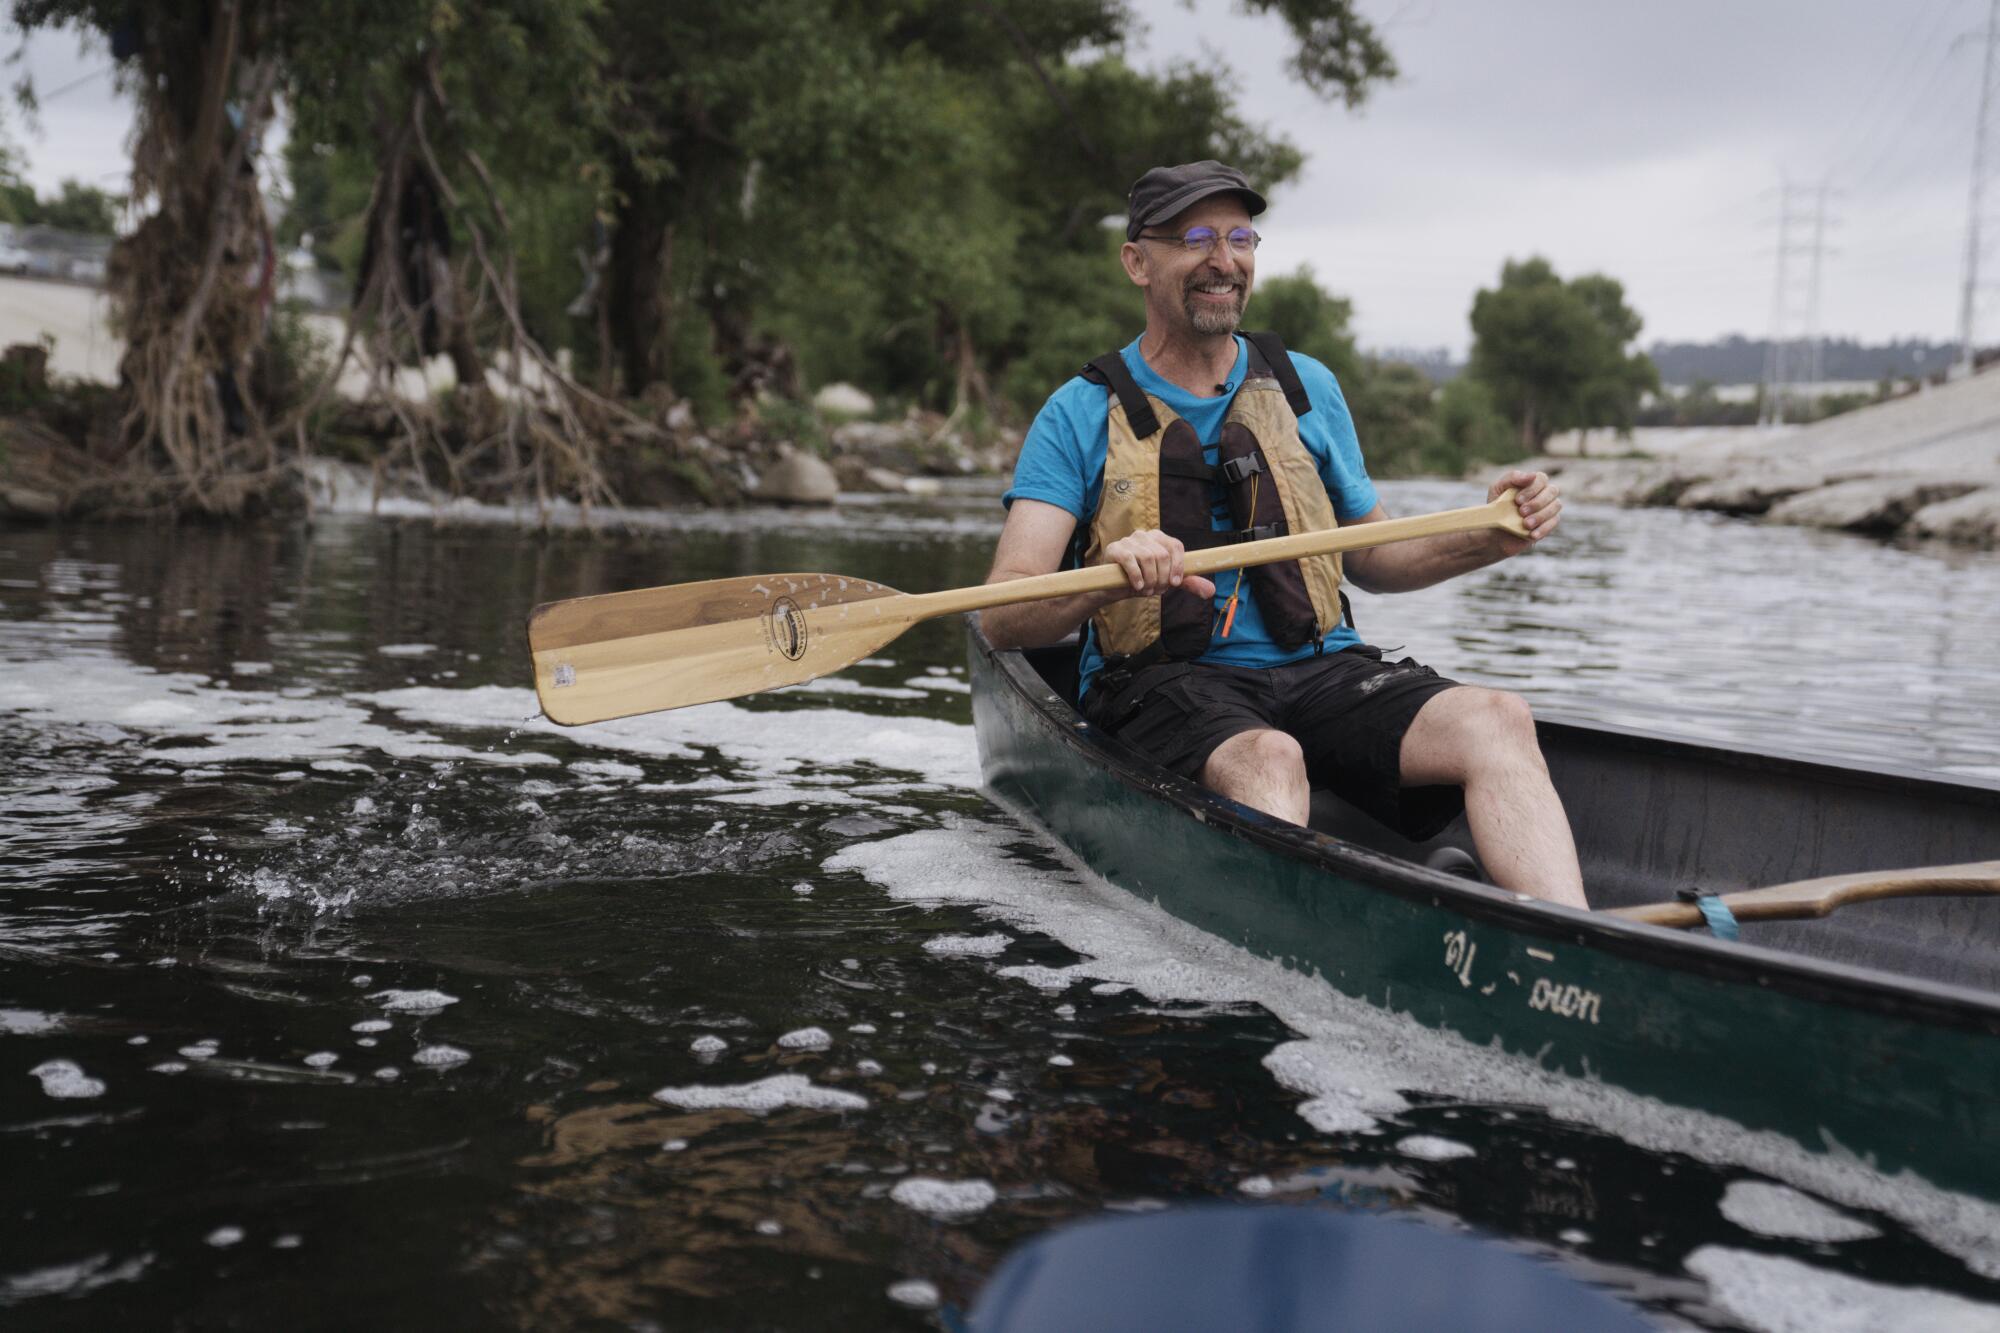 A man in a canoe grins as he holds a paddle above the waters of a river.